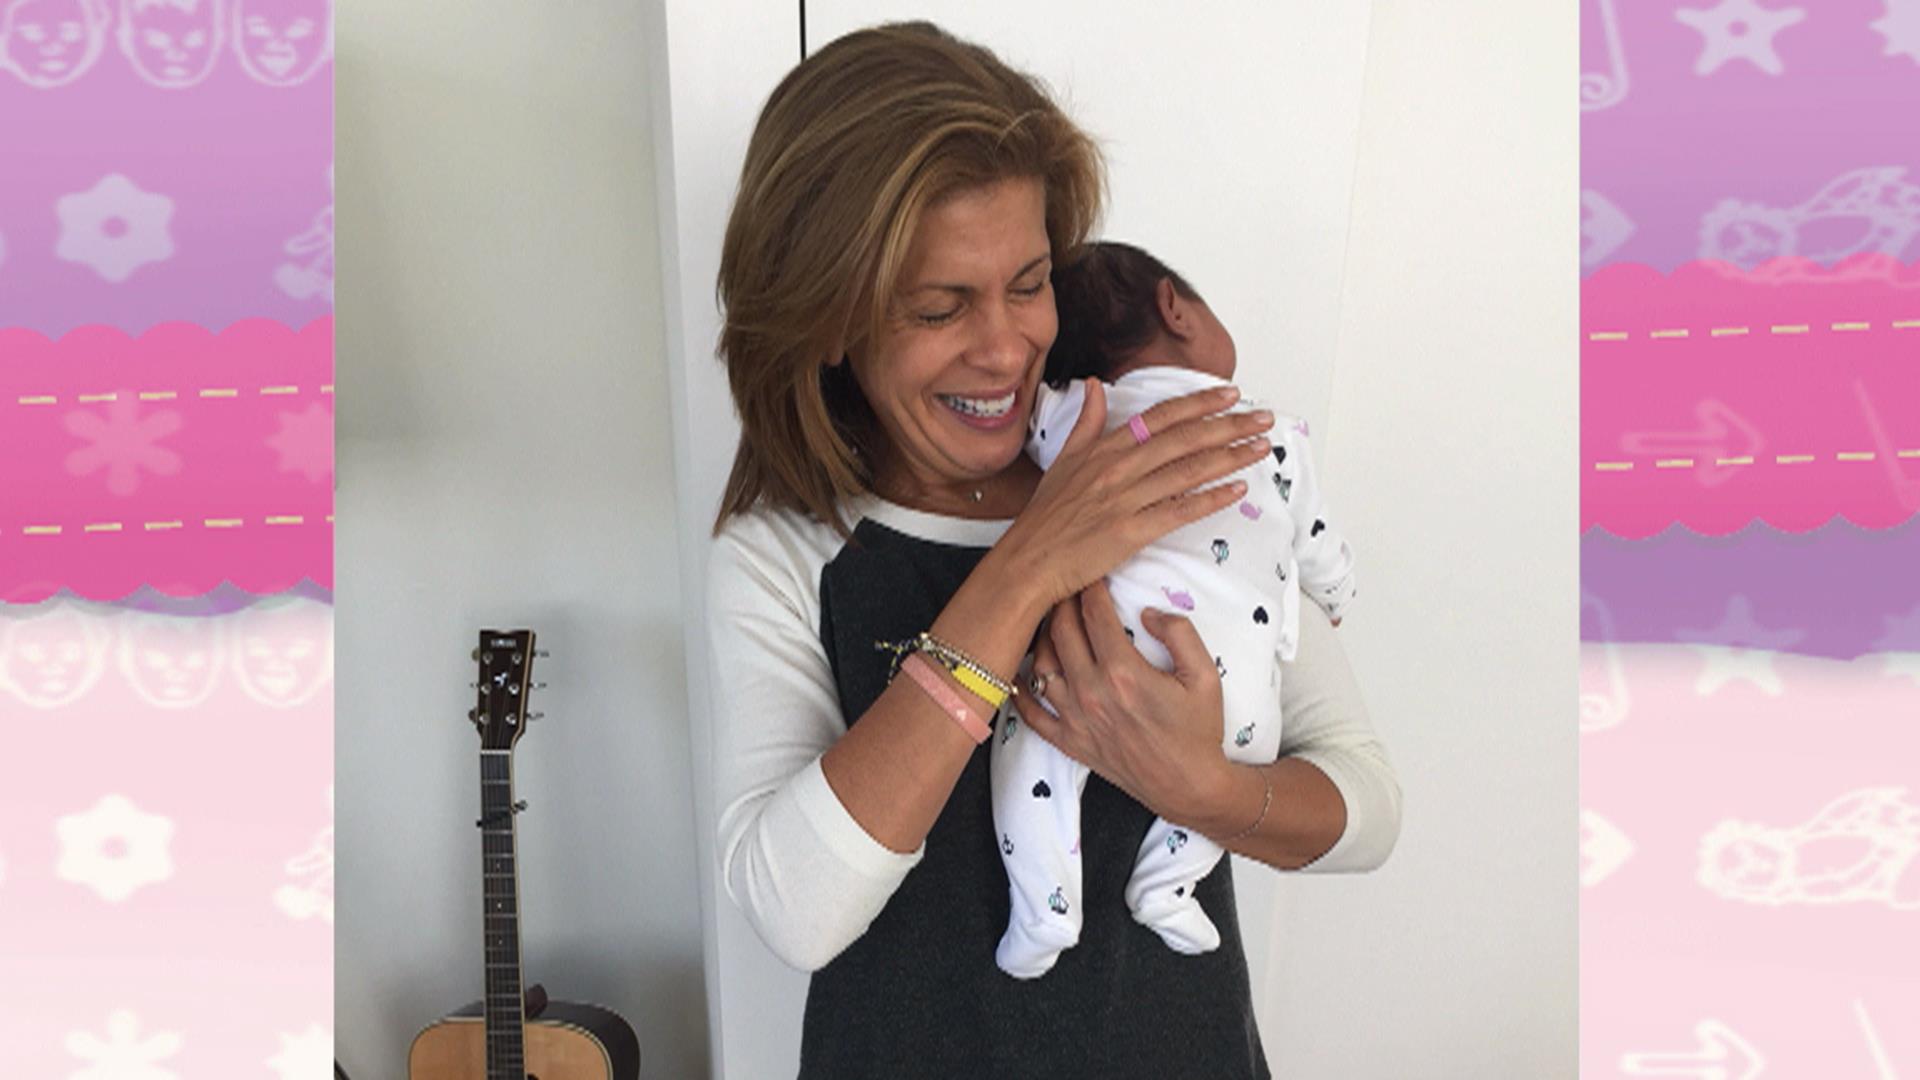 Hoda Kotb and her adopted baby Haley get an outpouring of love - TODAY.com1920 x 1080